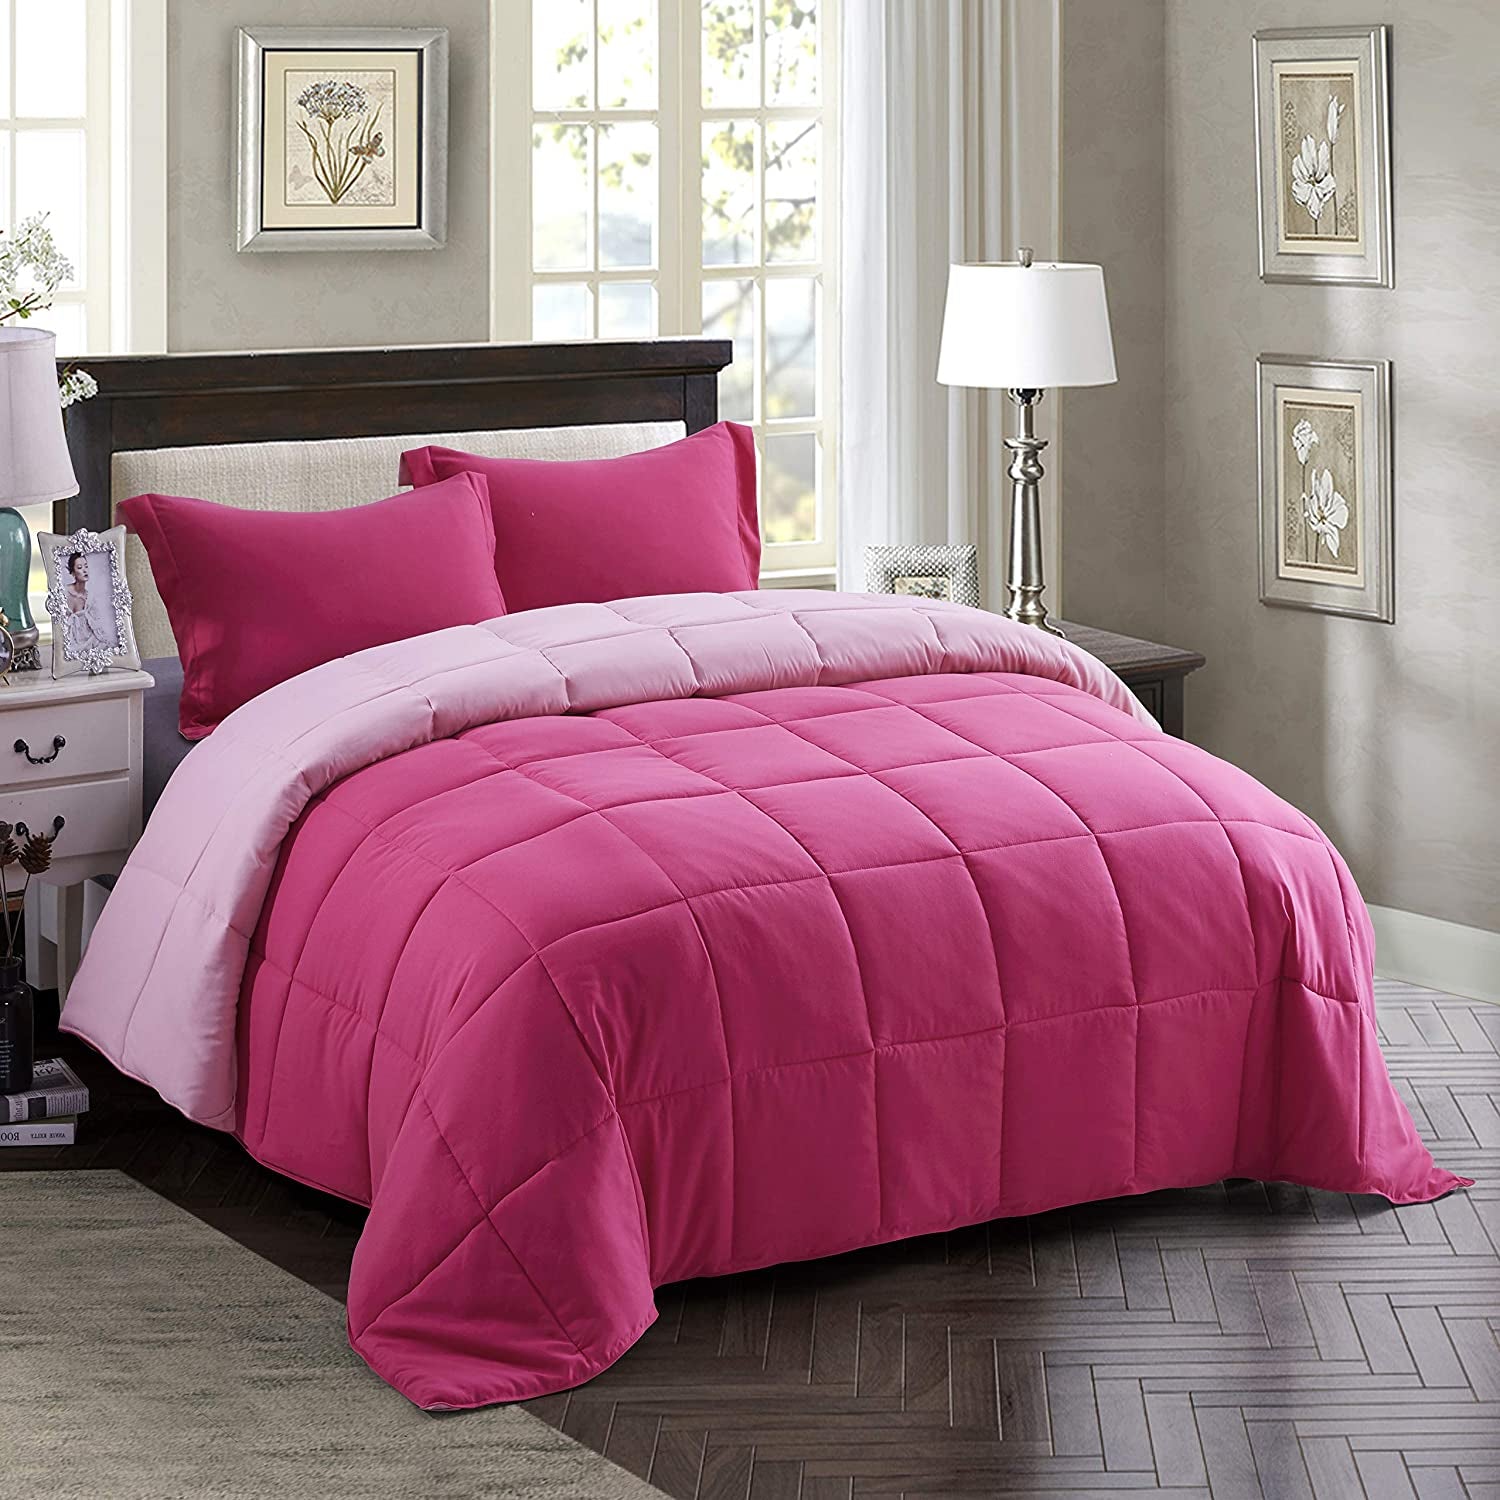 3Pc down Alternative Comforter Set - All Season Reversible Comforter with Sham - Quilted Duvet Insert with Corner Tabs - Box Stitched - Super Soft, Fluffy (Twin/Twin XL, Pink)